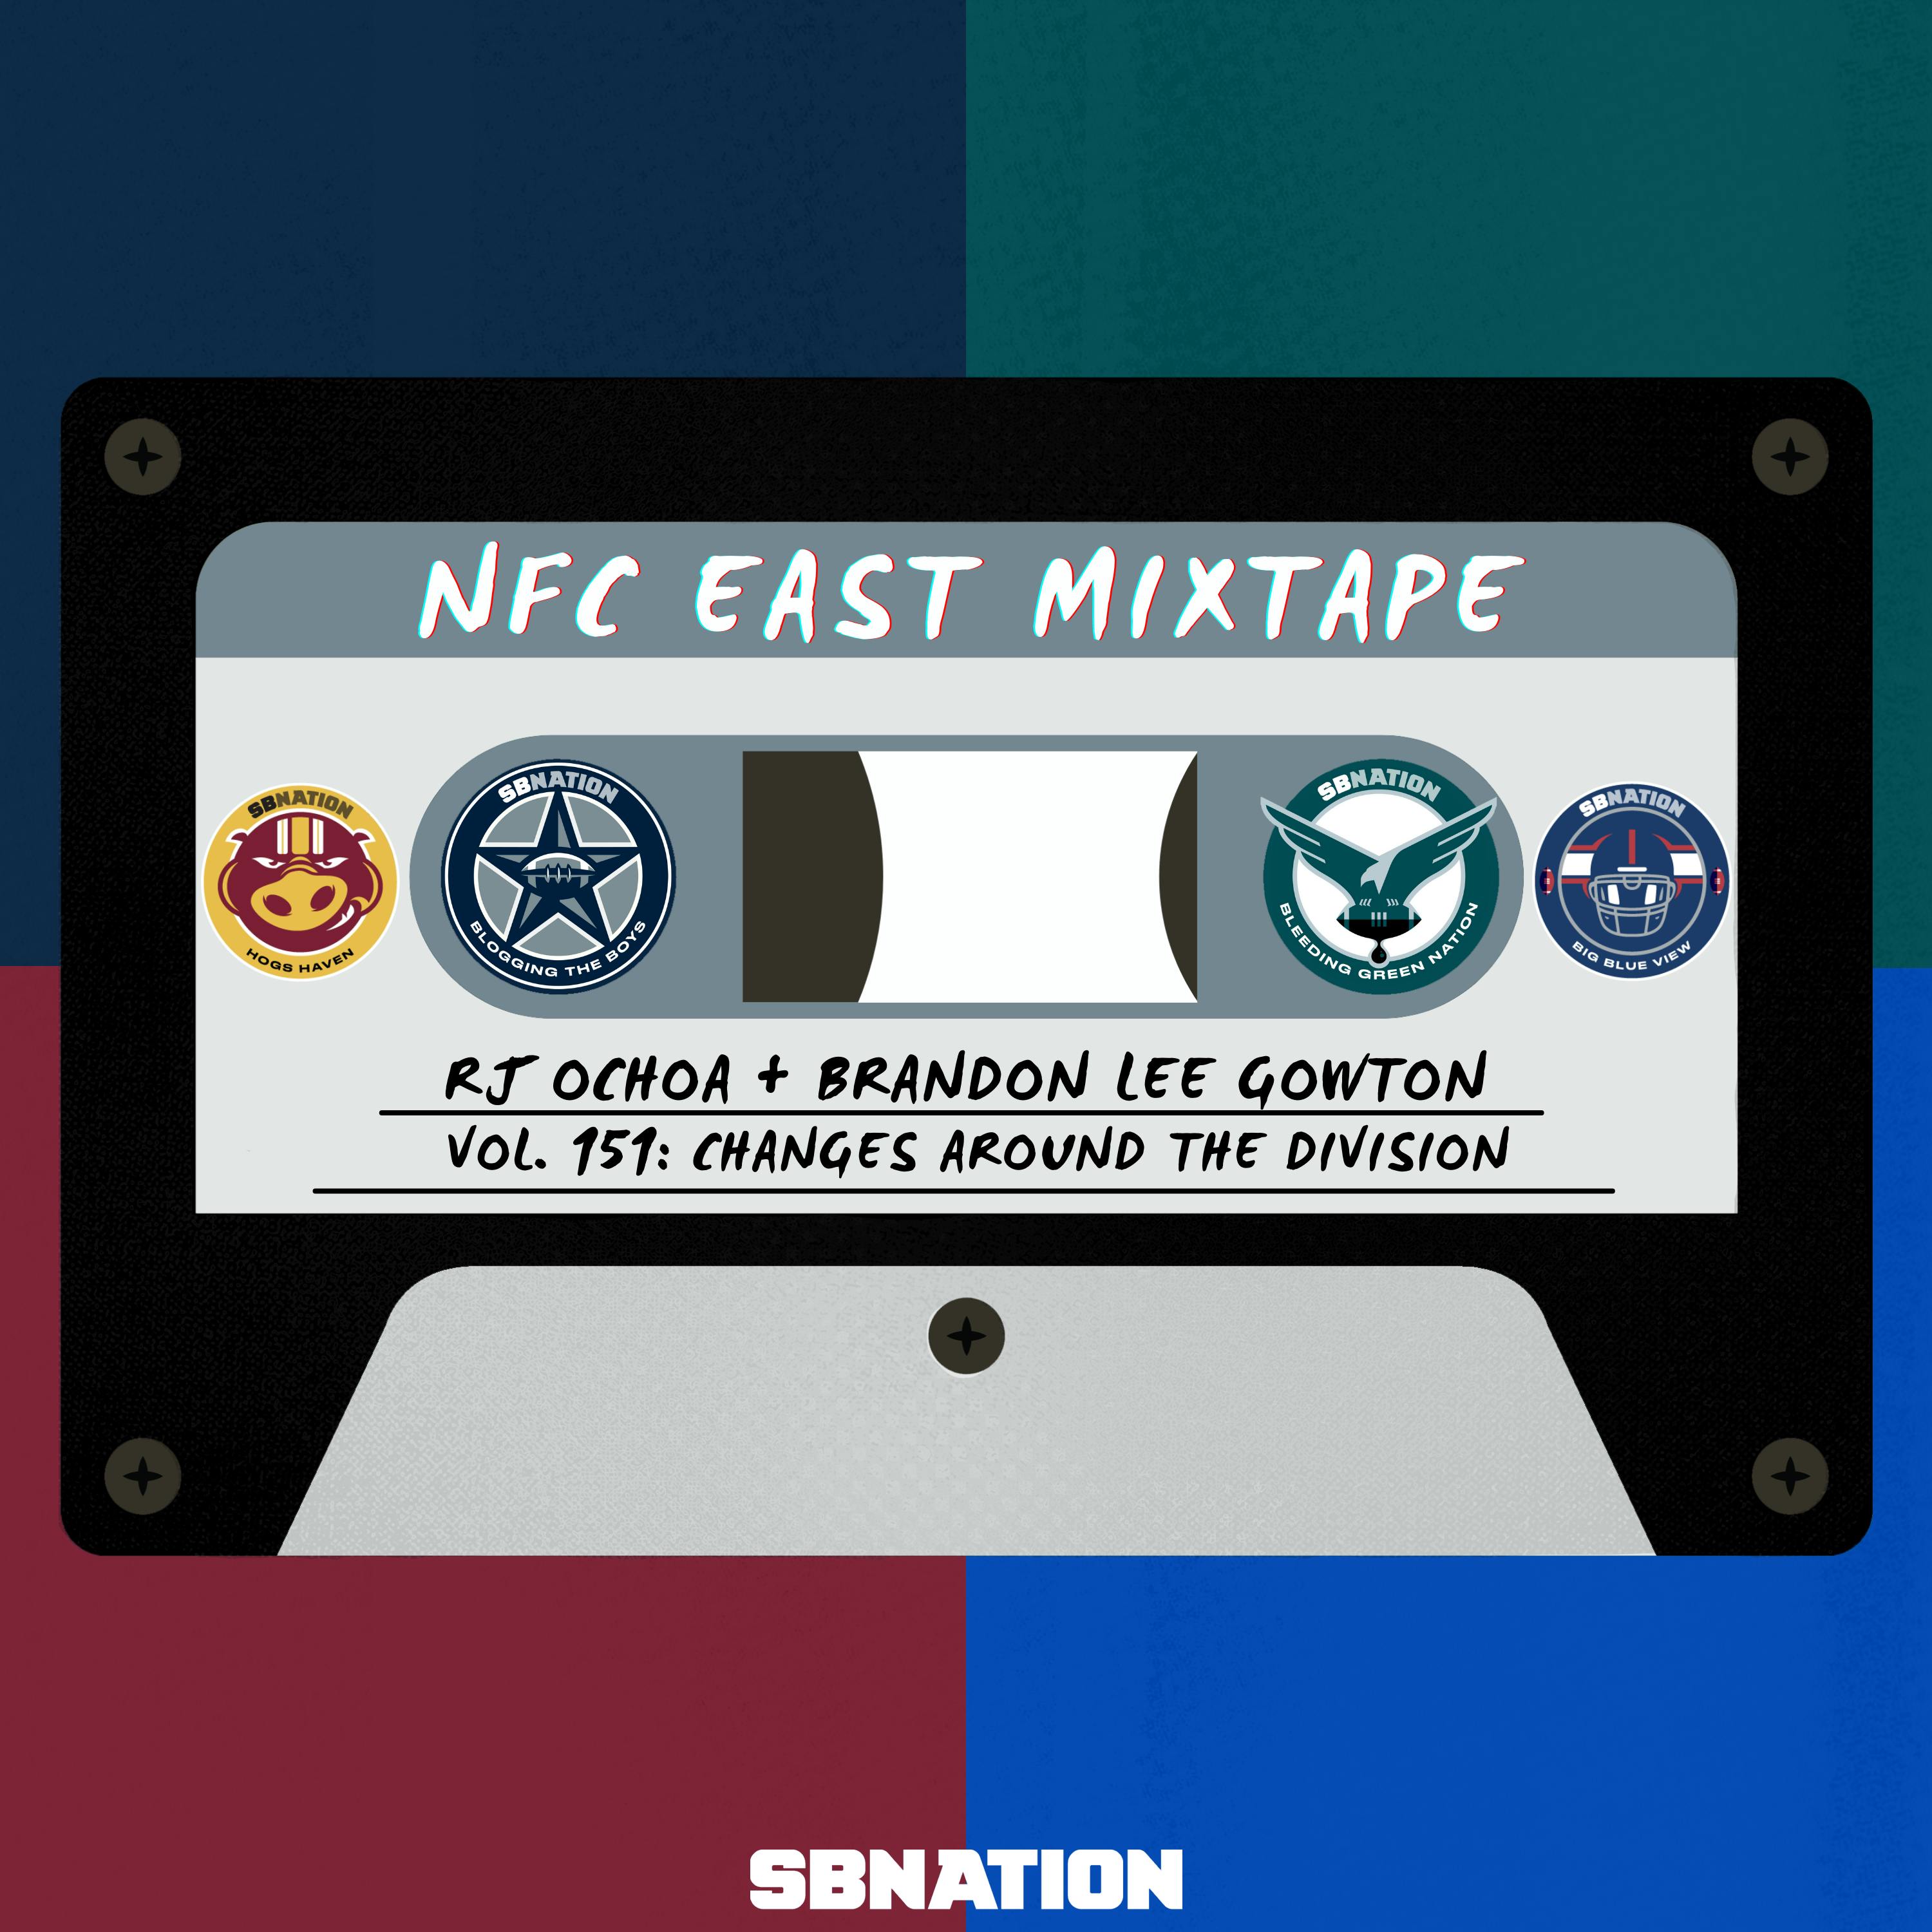 NFC East Mixtape Vol. 151: Changes around the division